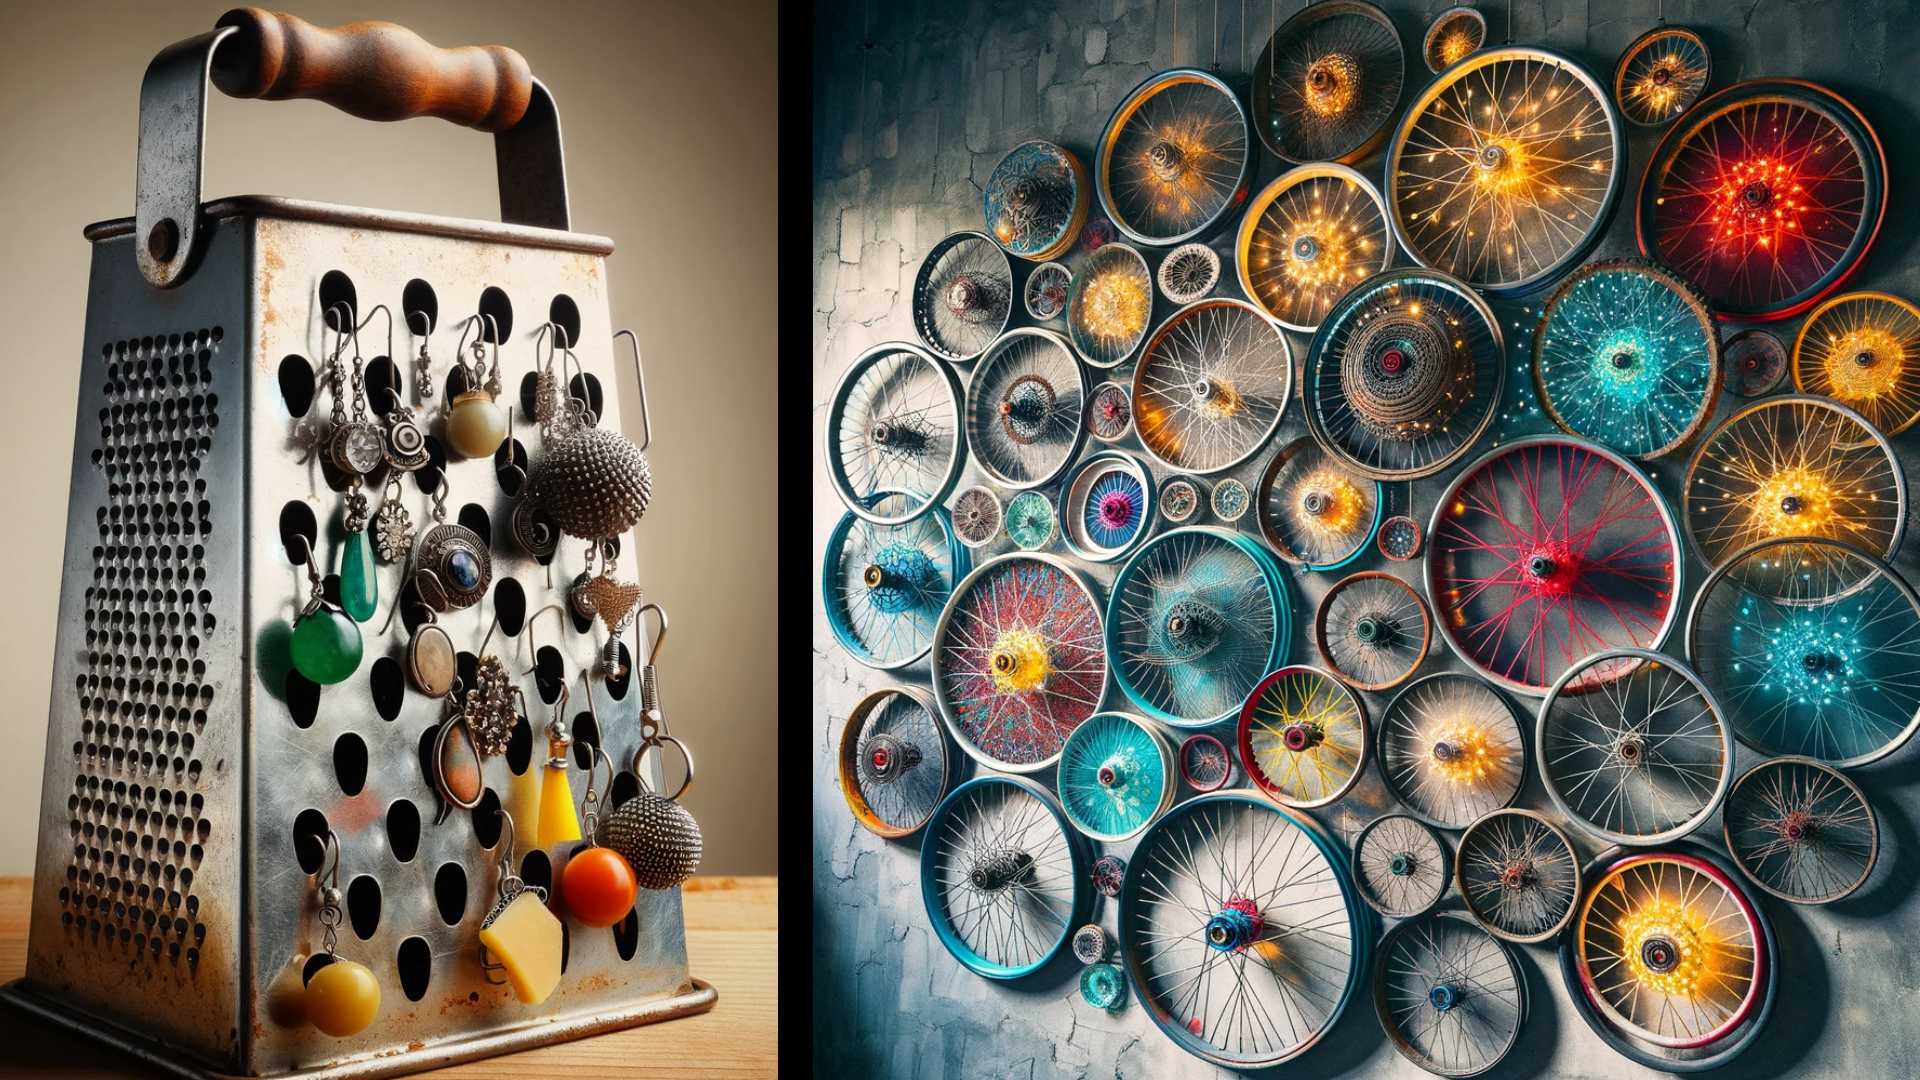 Repurposed - Upcycled Grater and Bicycle Wheels